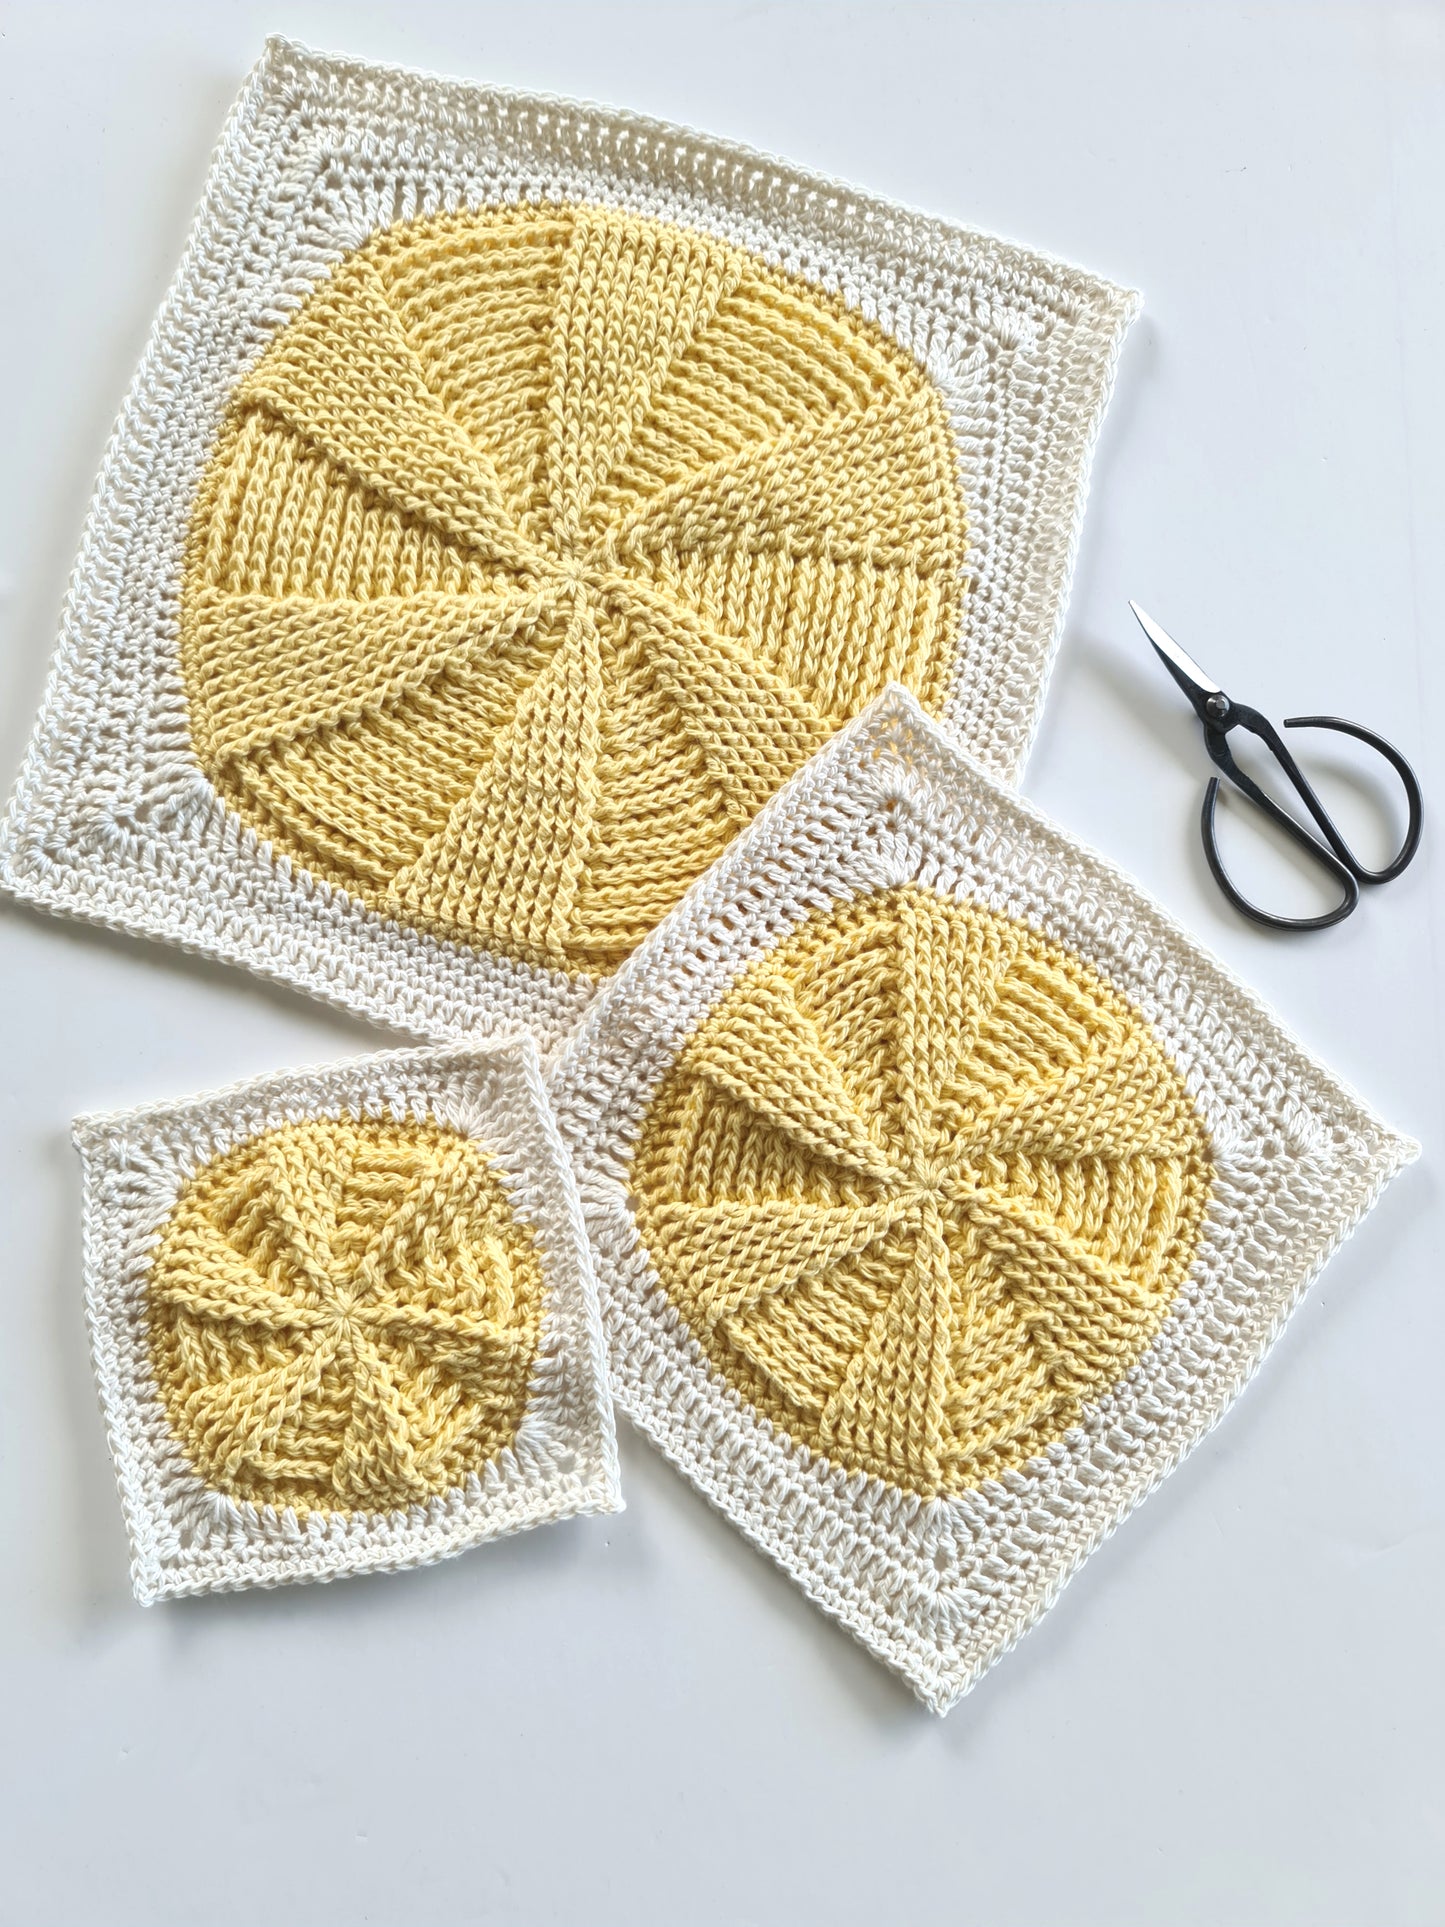 Three different size cream and yellow Vinyl Revival Granny square crochet patterns by Shelley Husband with a pair of black yarn scissors